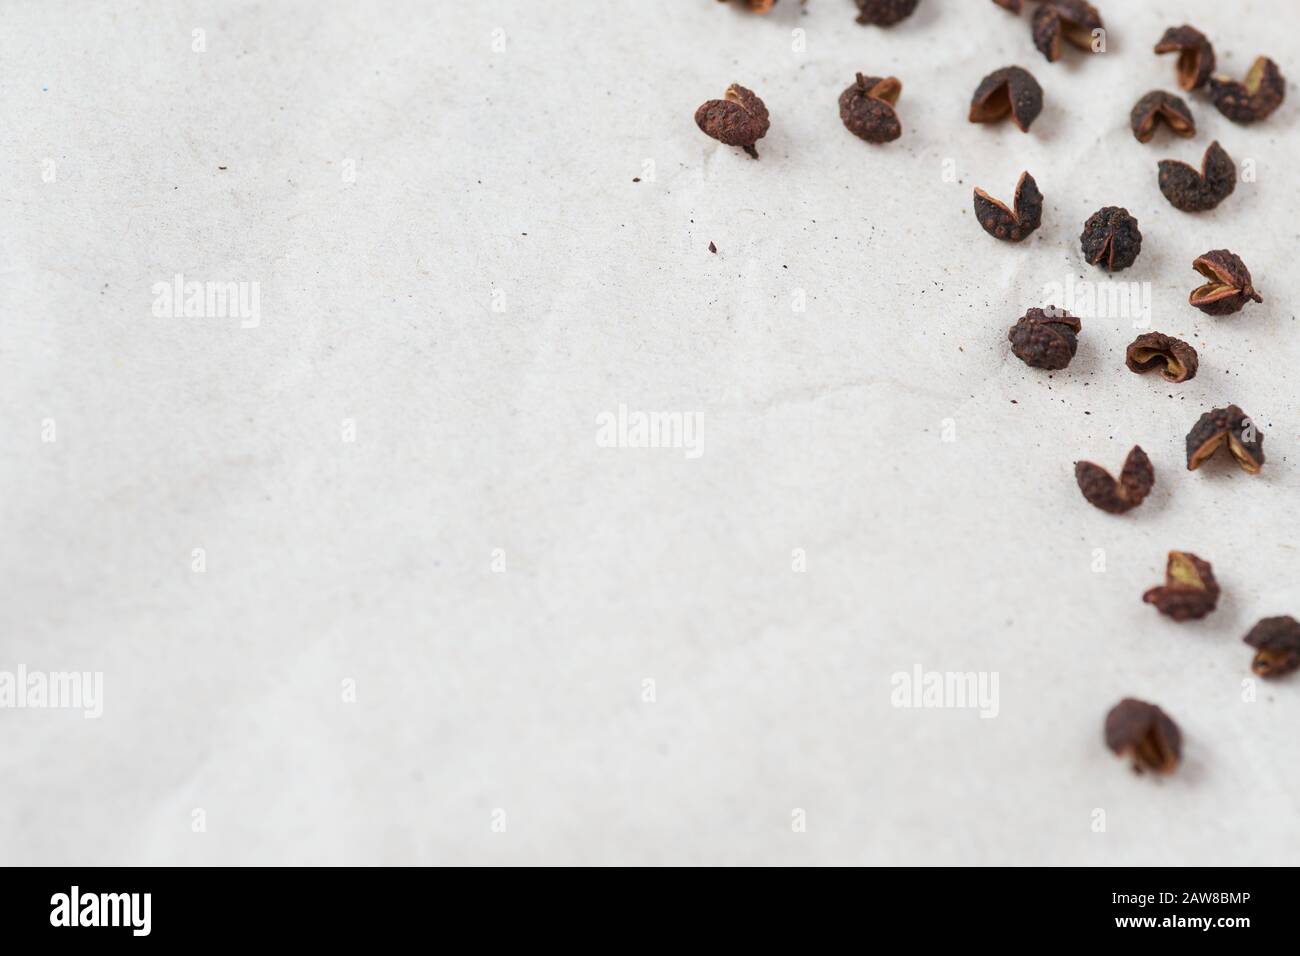 Macro photography of Timut pepper (Zanthoxylum armatum), from the same family as Sichuan Pepper. This spice delivers a very aromatic flavour close to Stock Photo